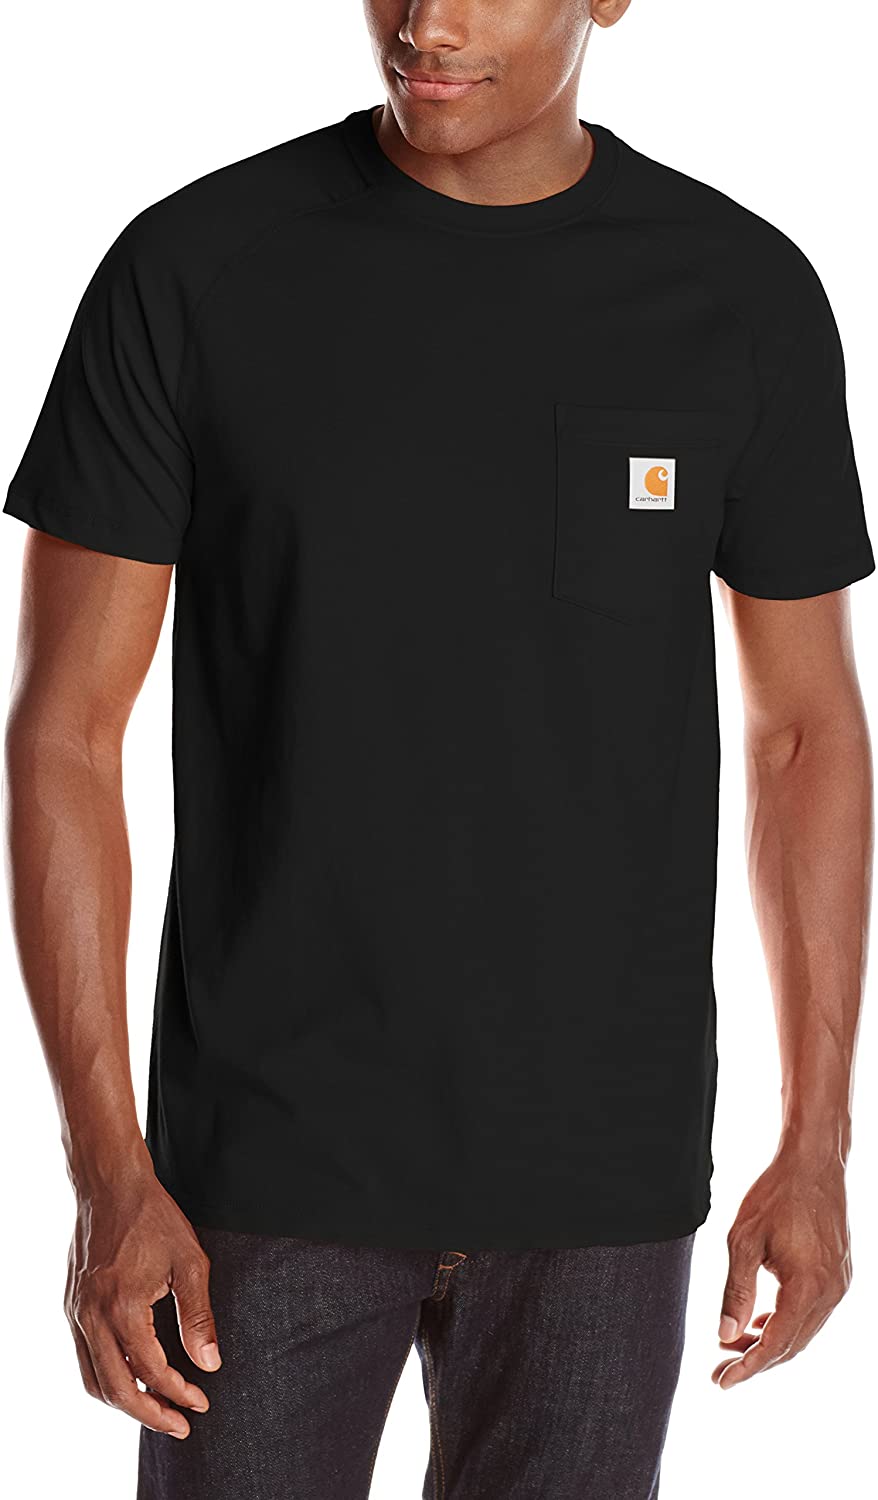 Carhartt Mens Force Cotton Delmont Short Sleeve T-Shirt Relaxed Fit Regular and Big /& Tall Sizes